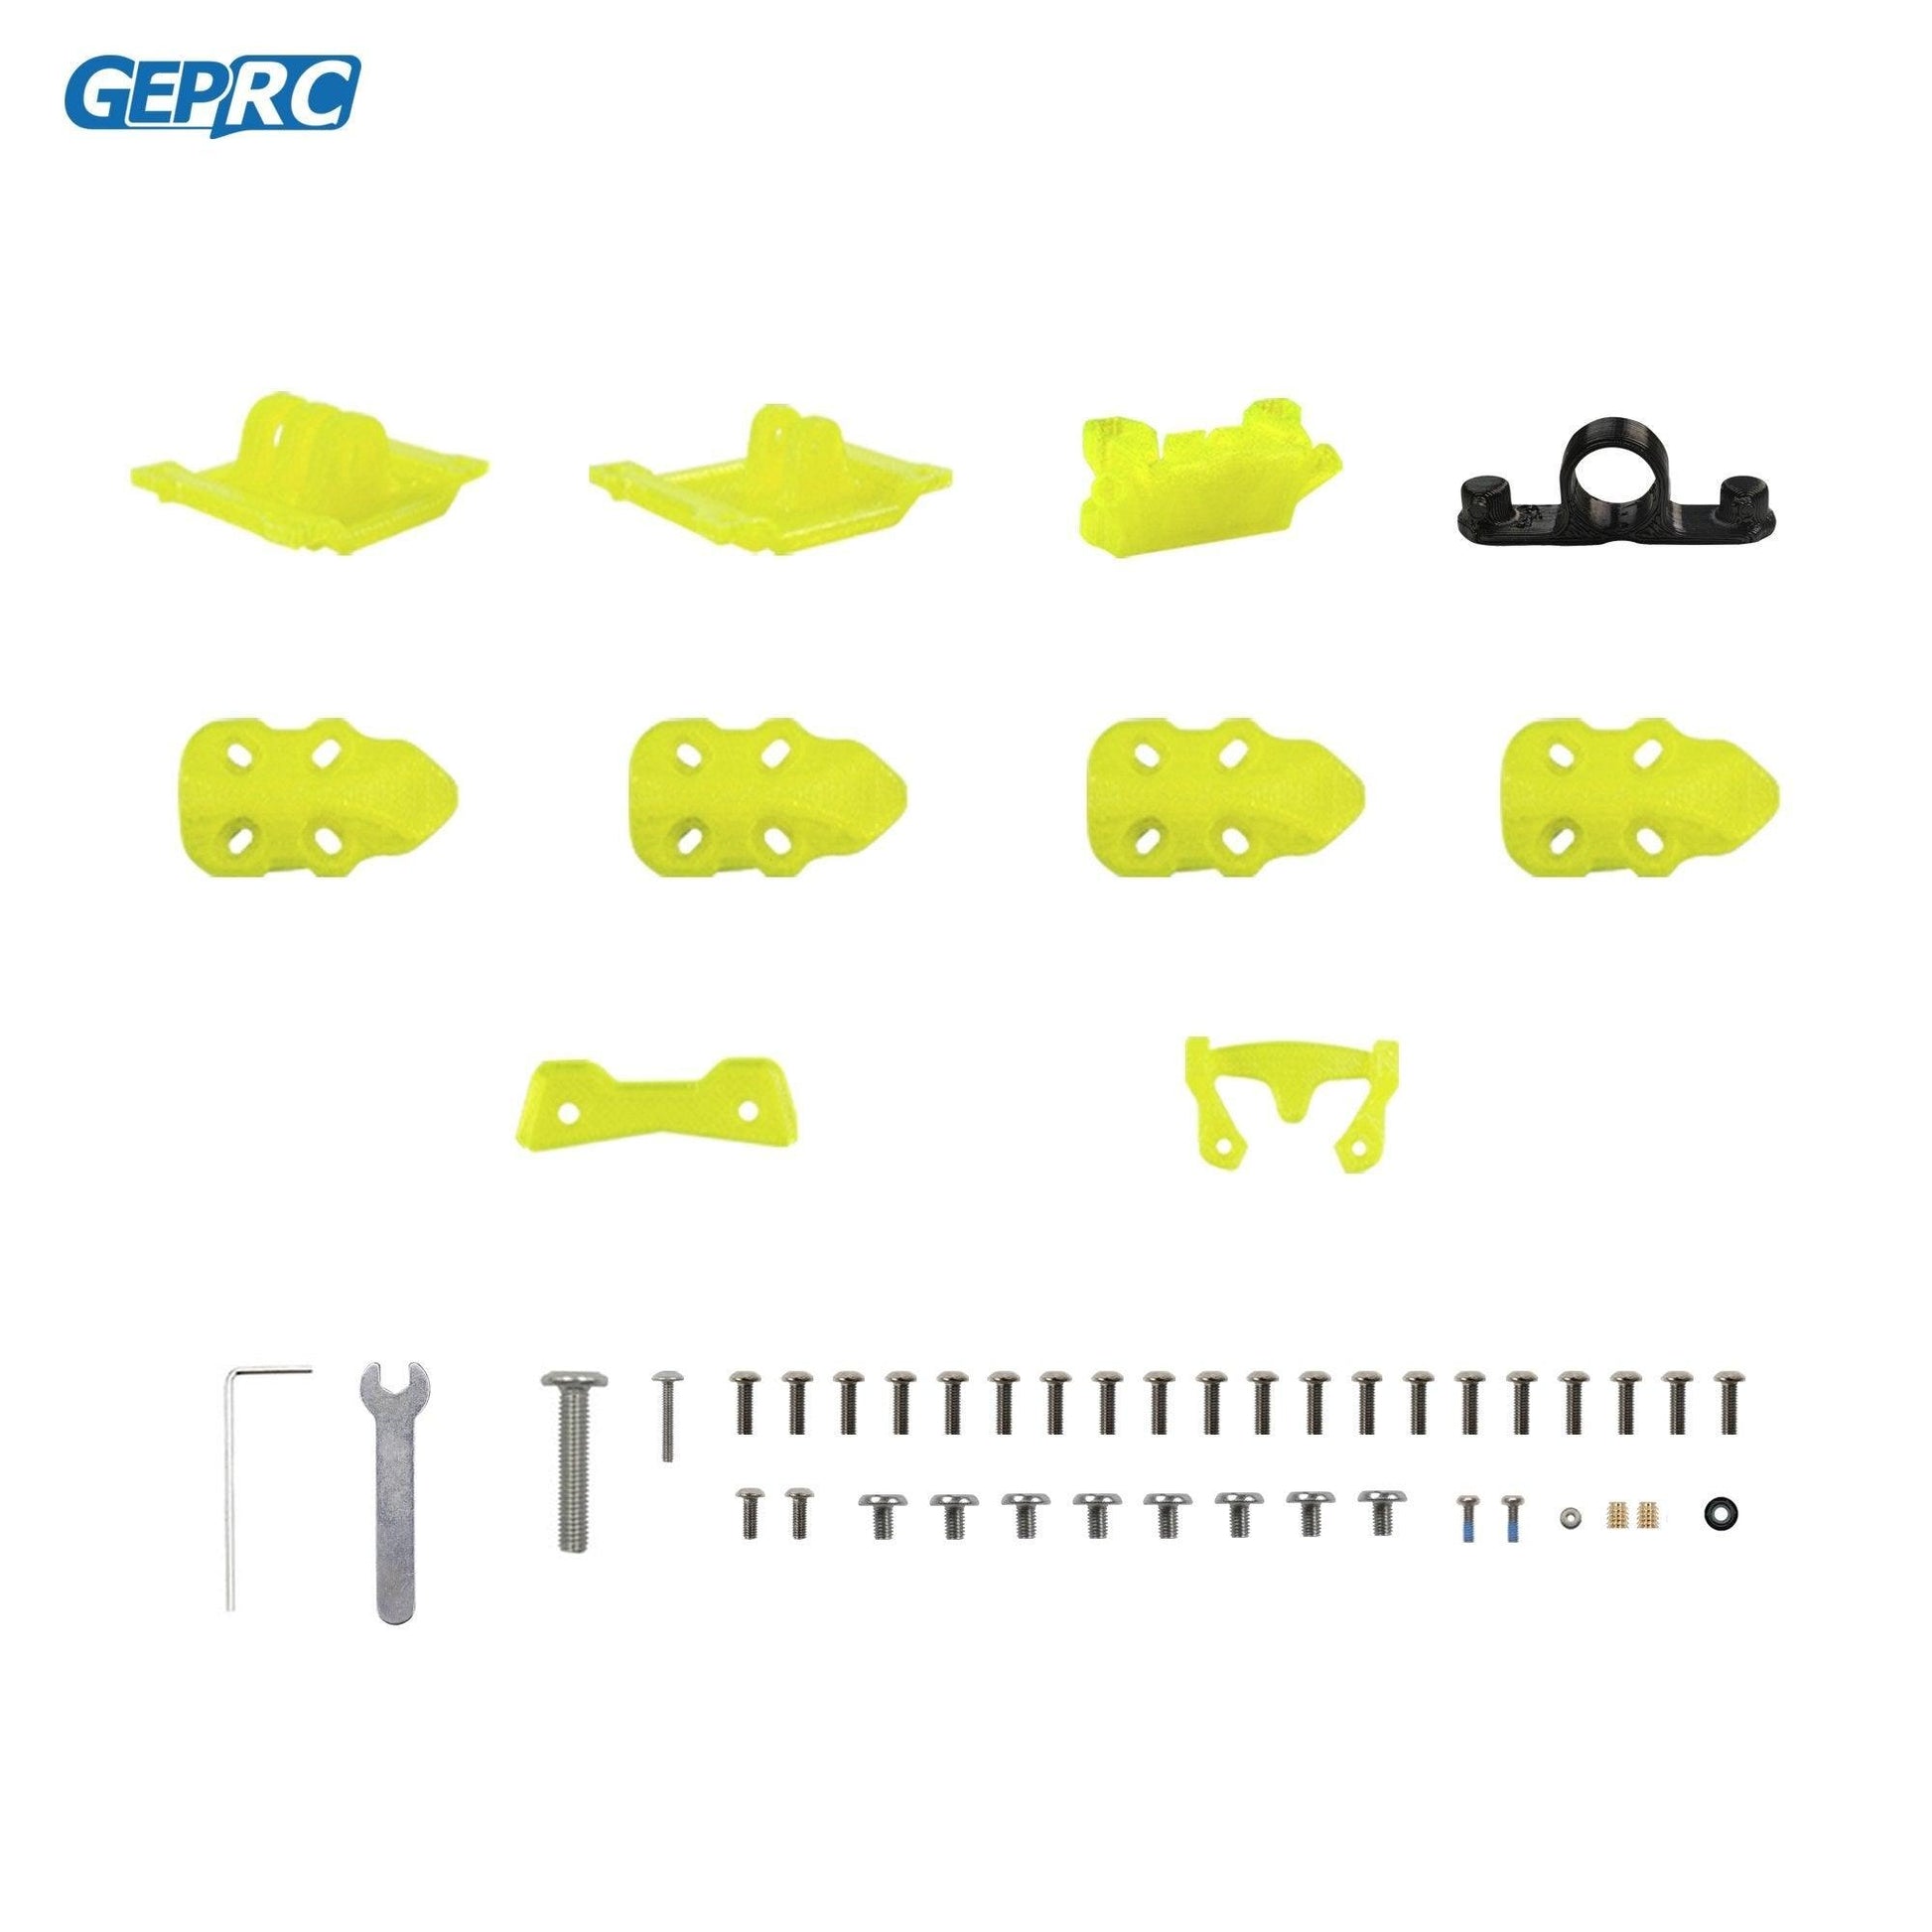 GEPRC GEP-MK5 FPV Frame Kit Parts Suitable For Mark5 Series Drone For DIY RC FPV Quadcopter Series Drone Replacement Accessories Parts - RCDrone